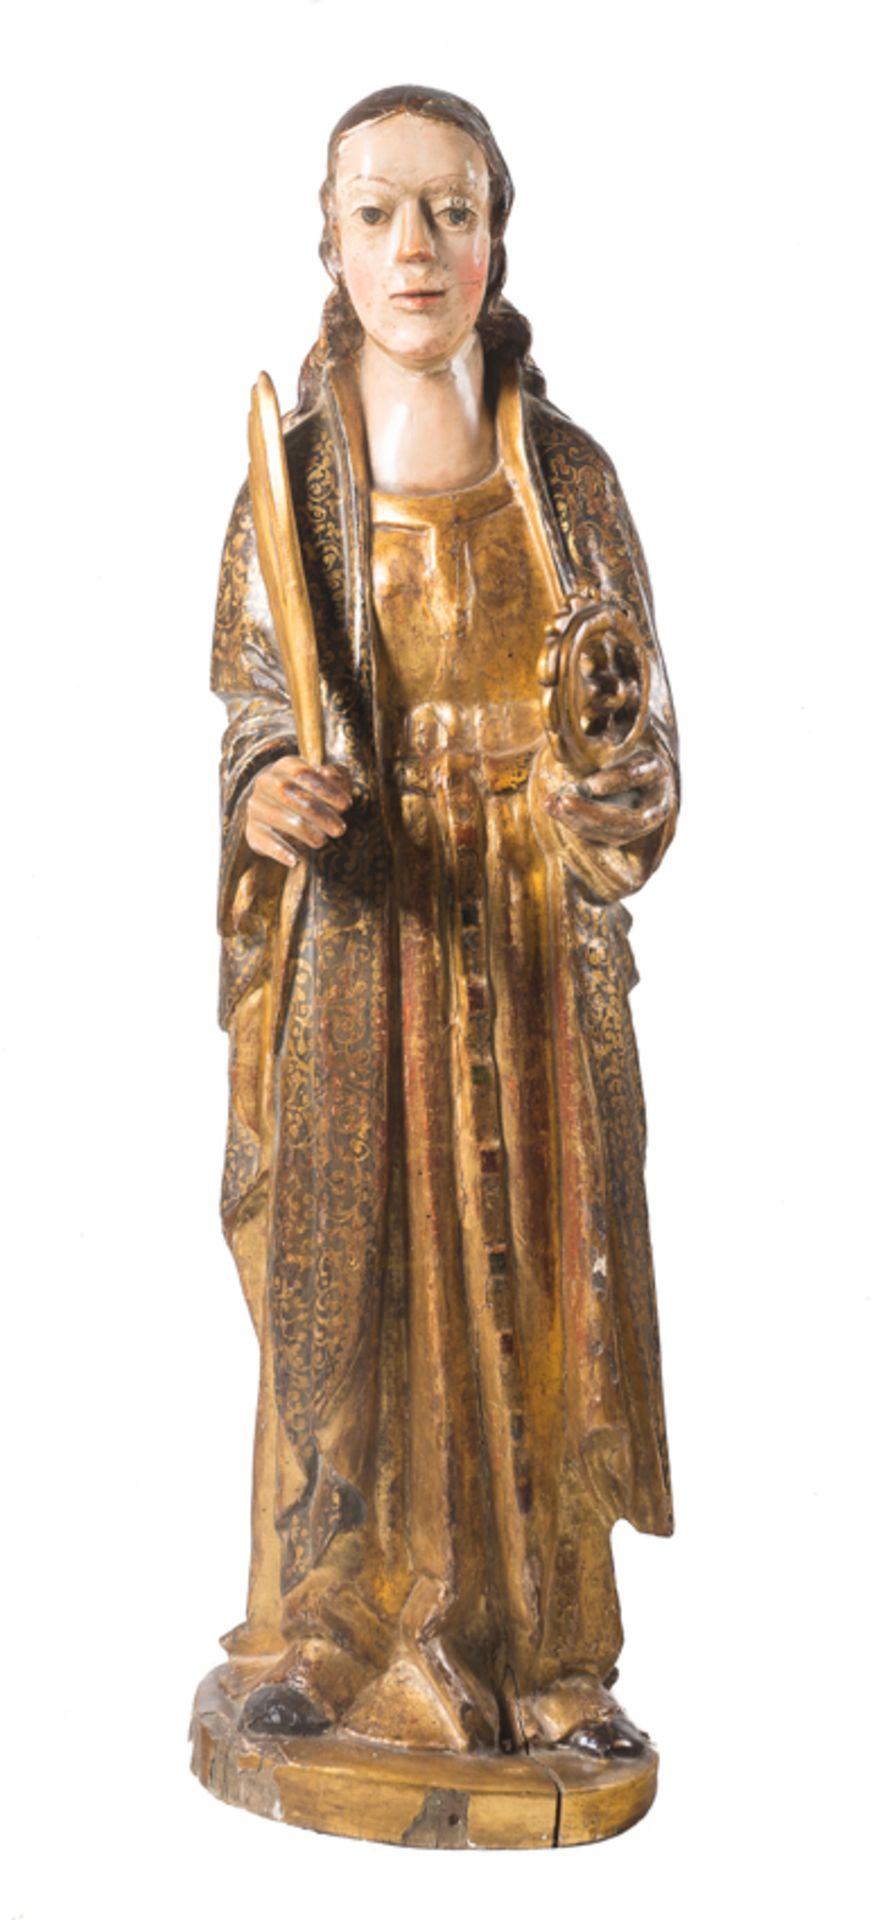 "Saint Catherine". Carved, polychromed and gilded wooden sculpture. Hispanic Flemish School. Early